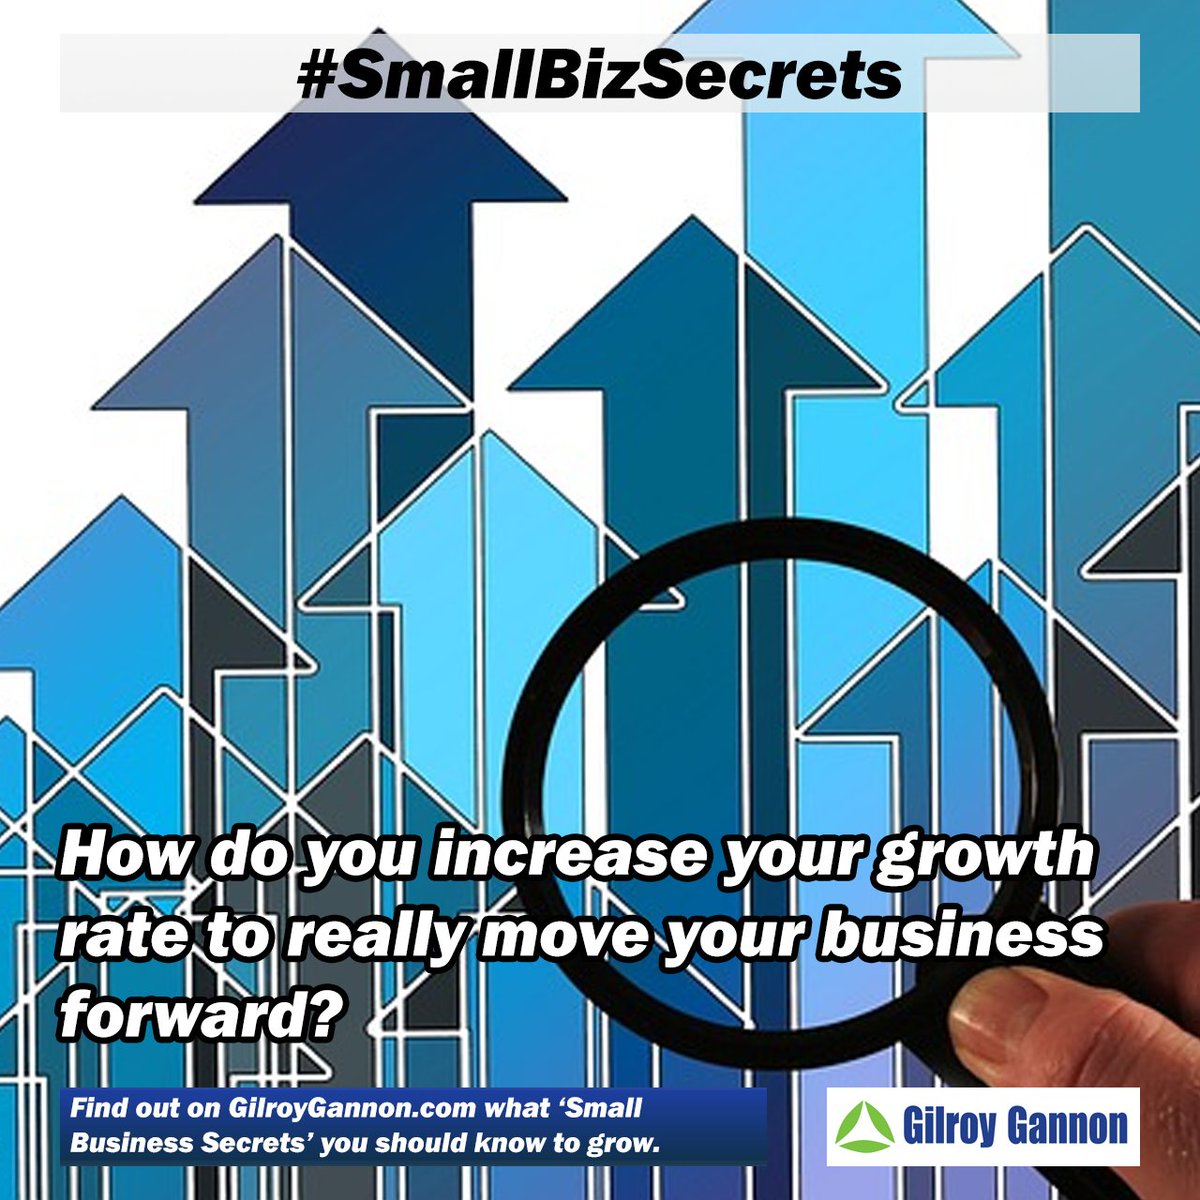 How do you increase your growth rate to really move your small business forward? Here are our tips. gilroygannon.com/secrets-small-… #SmallBizSecrets